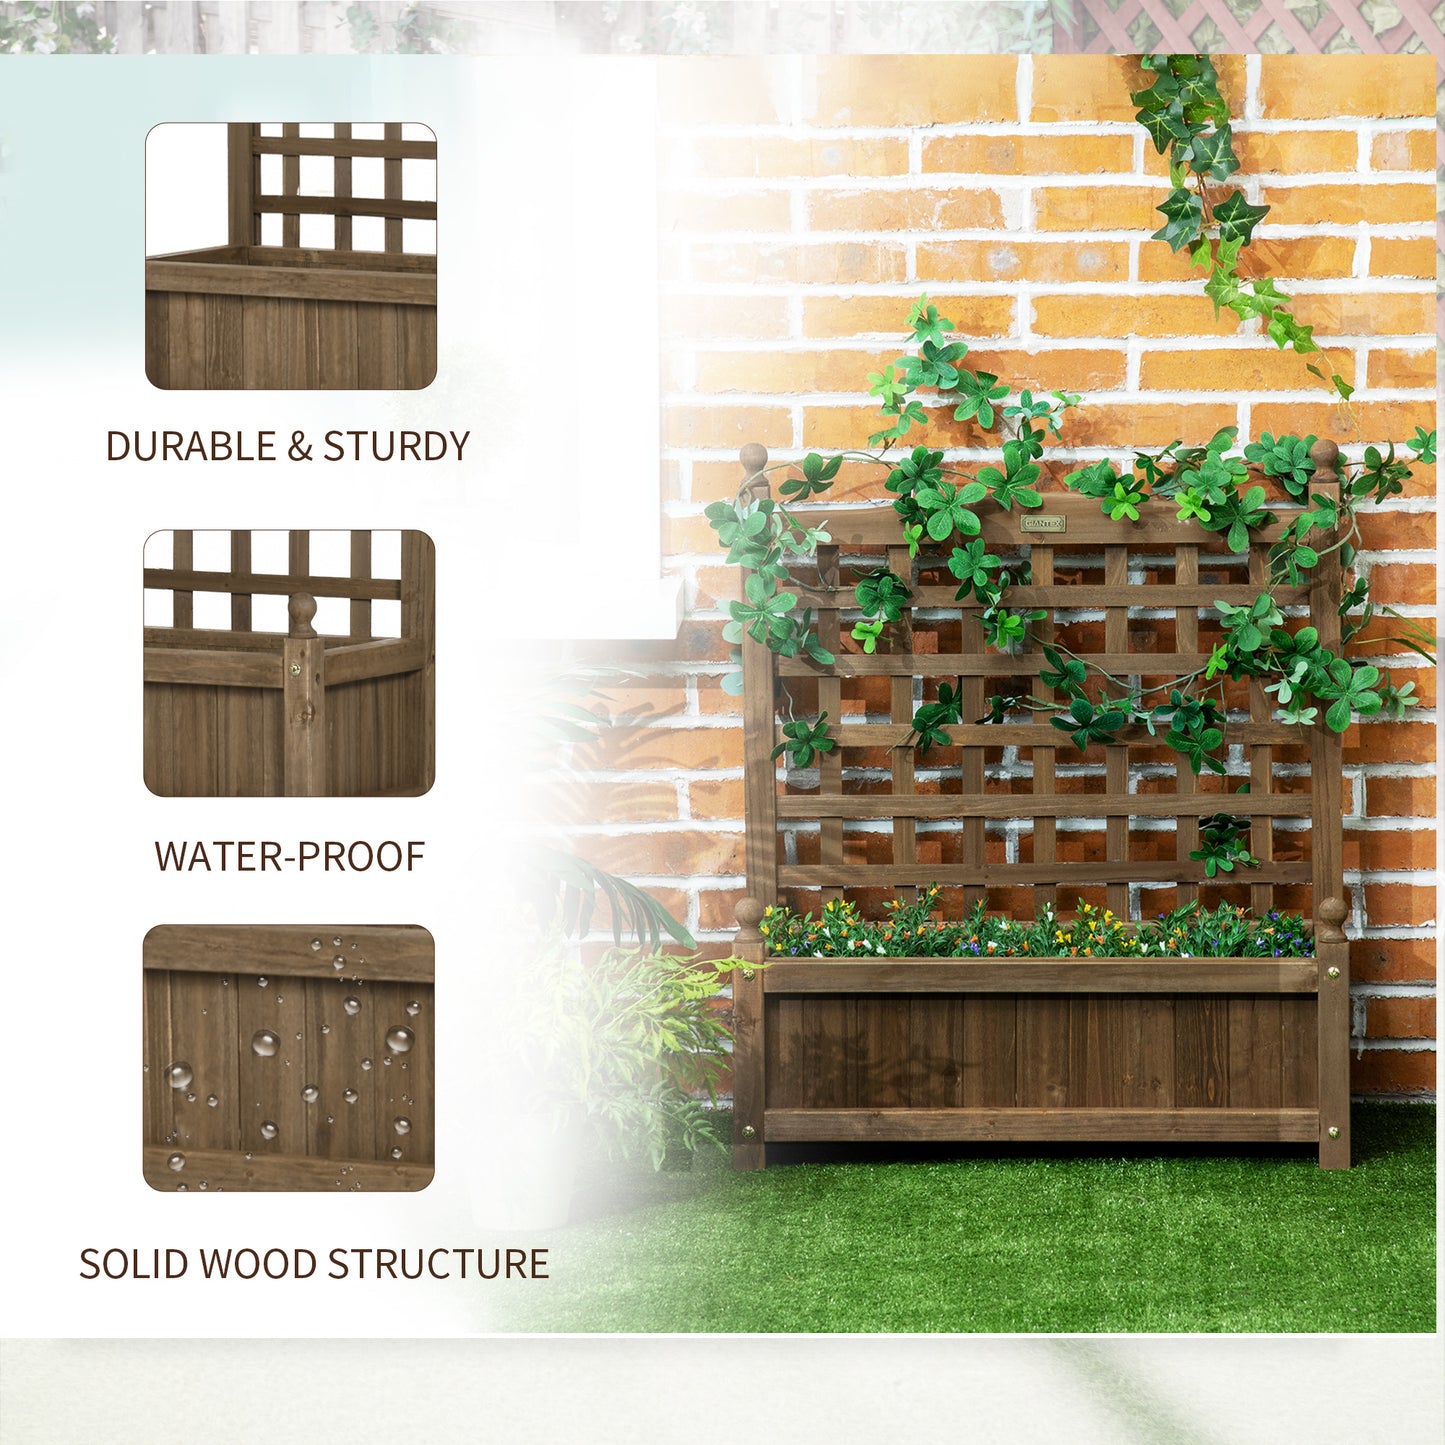 Outsunny Garden Planters with Trellis for Climbing Vines, Wood Raised Beds for Garden, Flower Pot, Indoor Outdoor, Brown